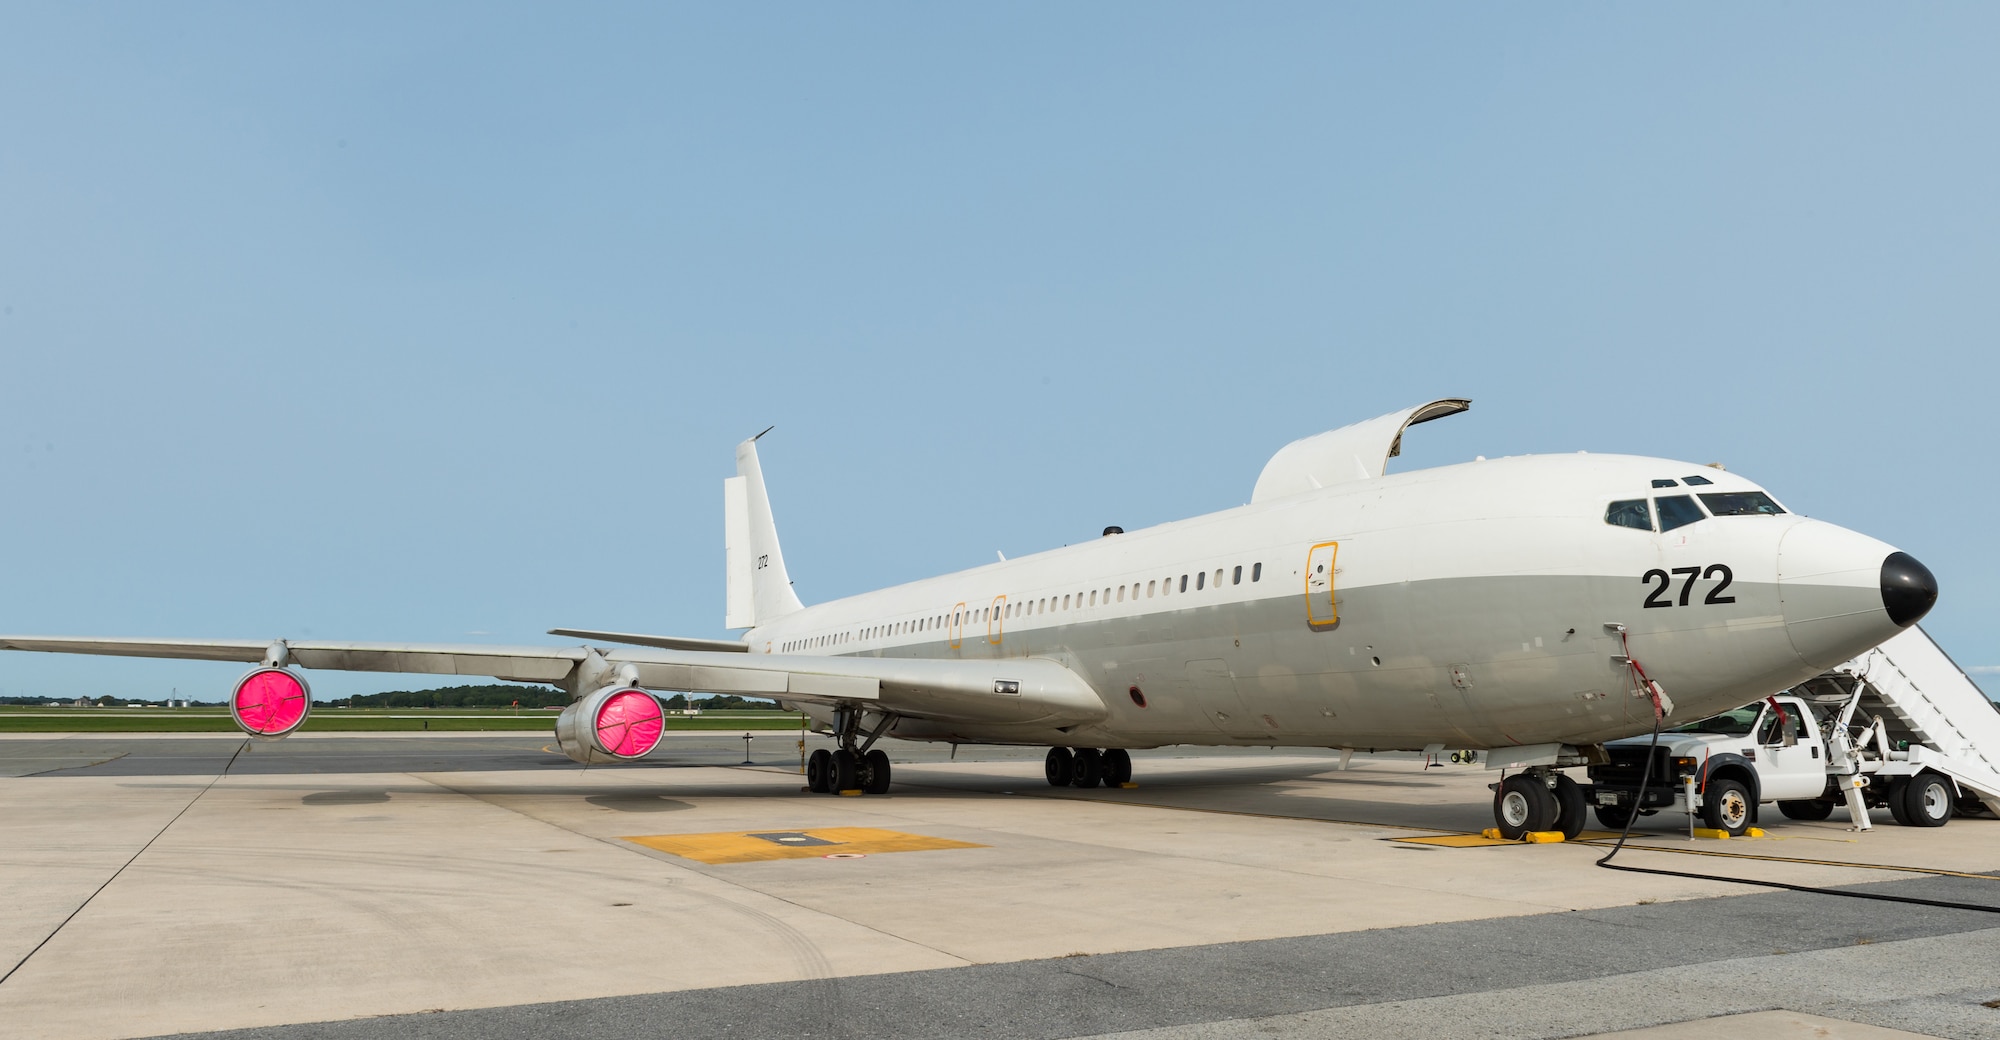 Airmen from the 436th Aerial Port Squadron loaded cargo onto an Israeli air force Boeing 707 Sept. 15, 2020, at Dover Air Force Base, Delaware, as part of a foreign military sales project. Over the past 70 years, the U.S. and Israel have developed unbreakable bonds through cooperation in security, economics and business, scientific research and innovation and people-to-people exchanges. Due to its strategic location, Dover AFB regularly supports foreign military sales operations. (U.S. Air Force photo by Roland Balik)